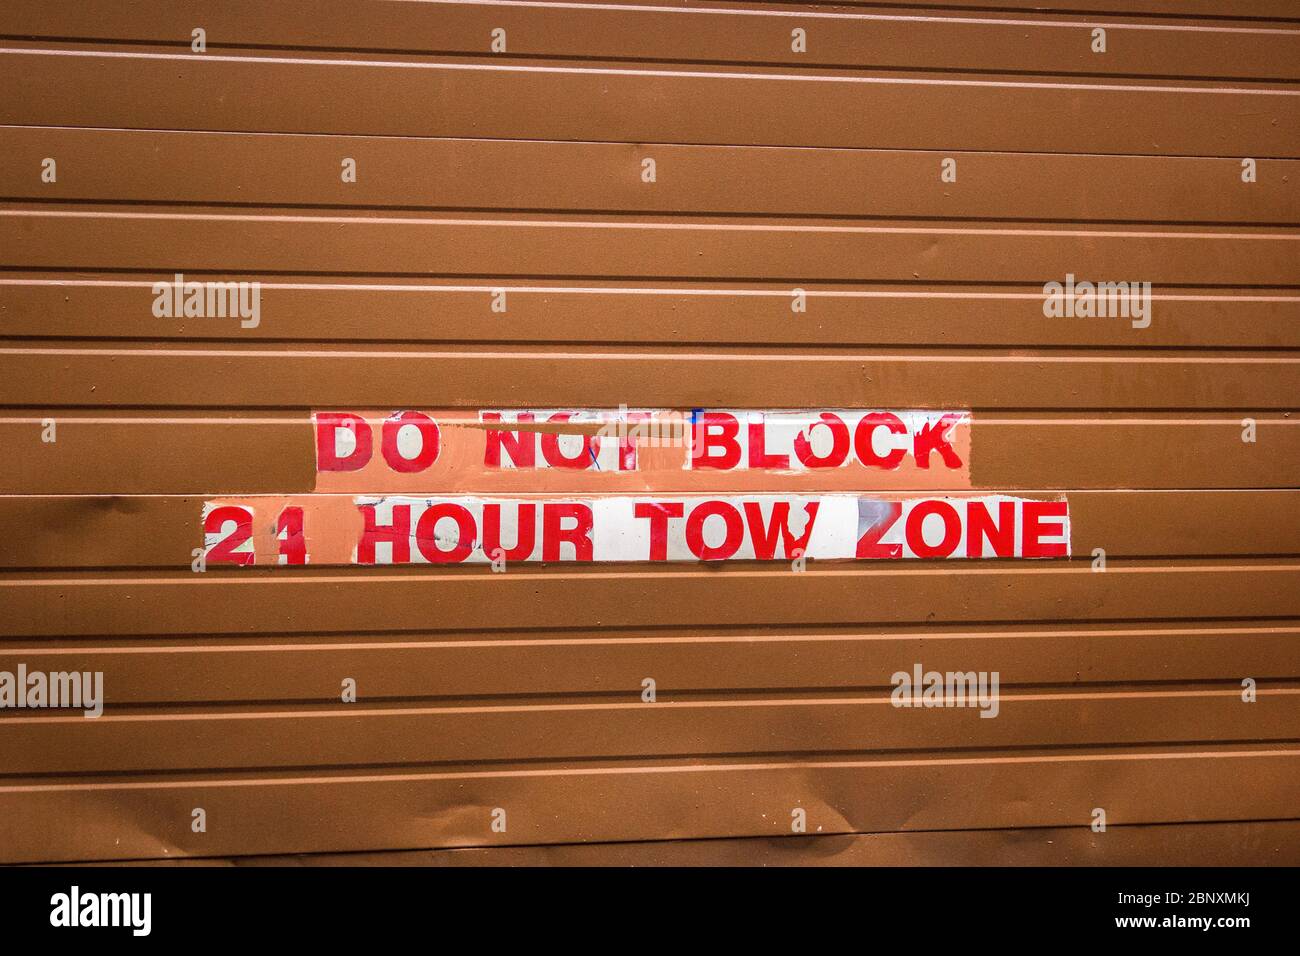 A metal roll up security door warning of a 24 hour tow zone. Stock Photo